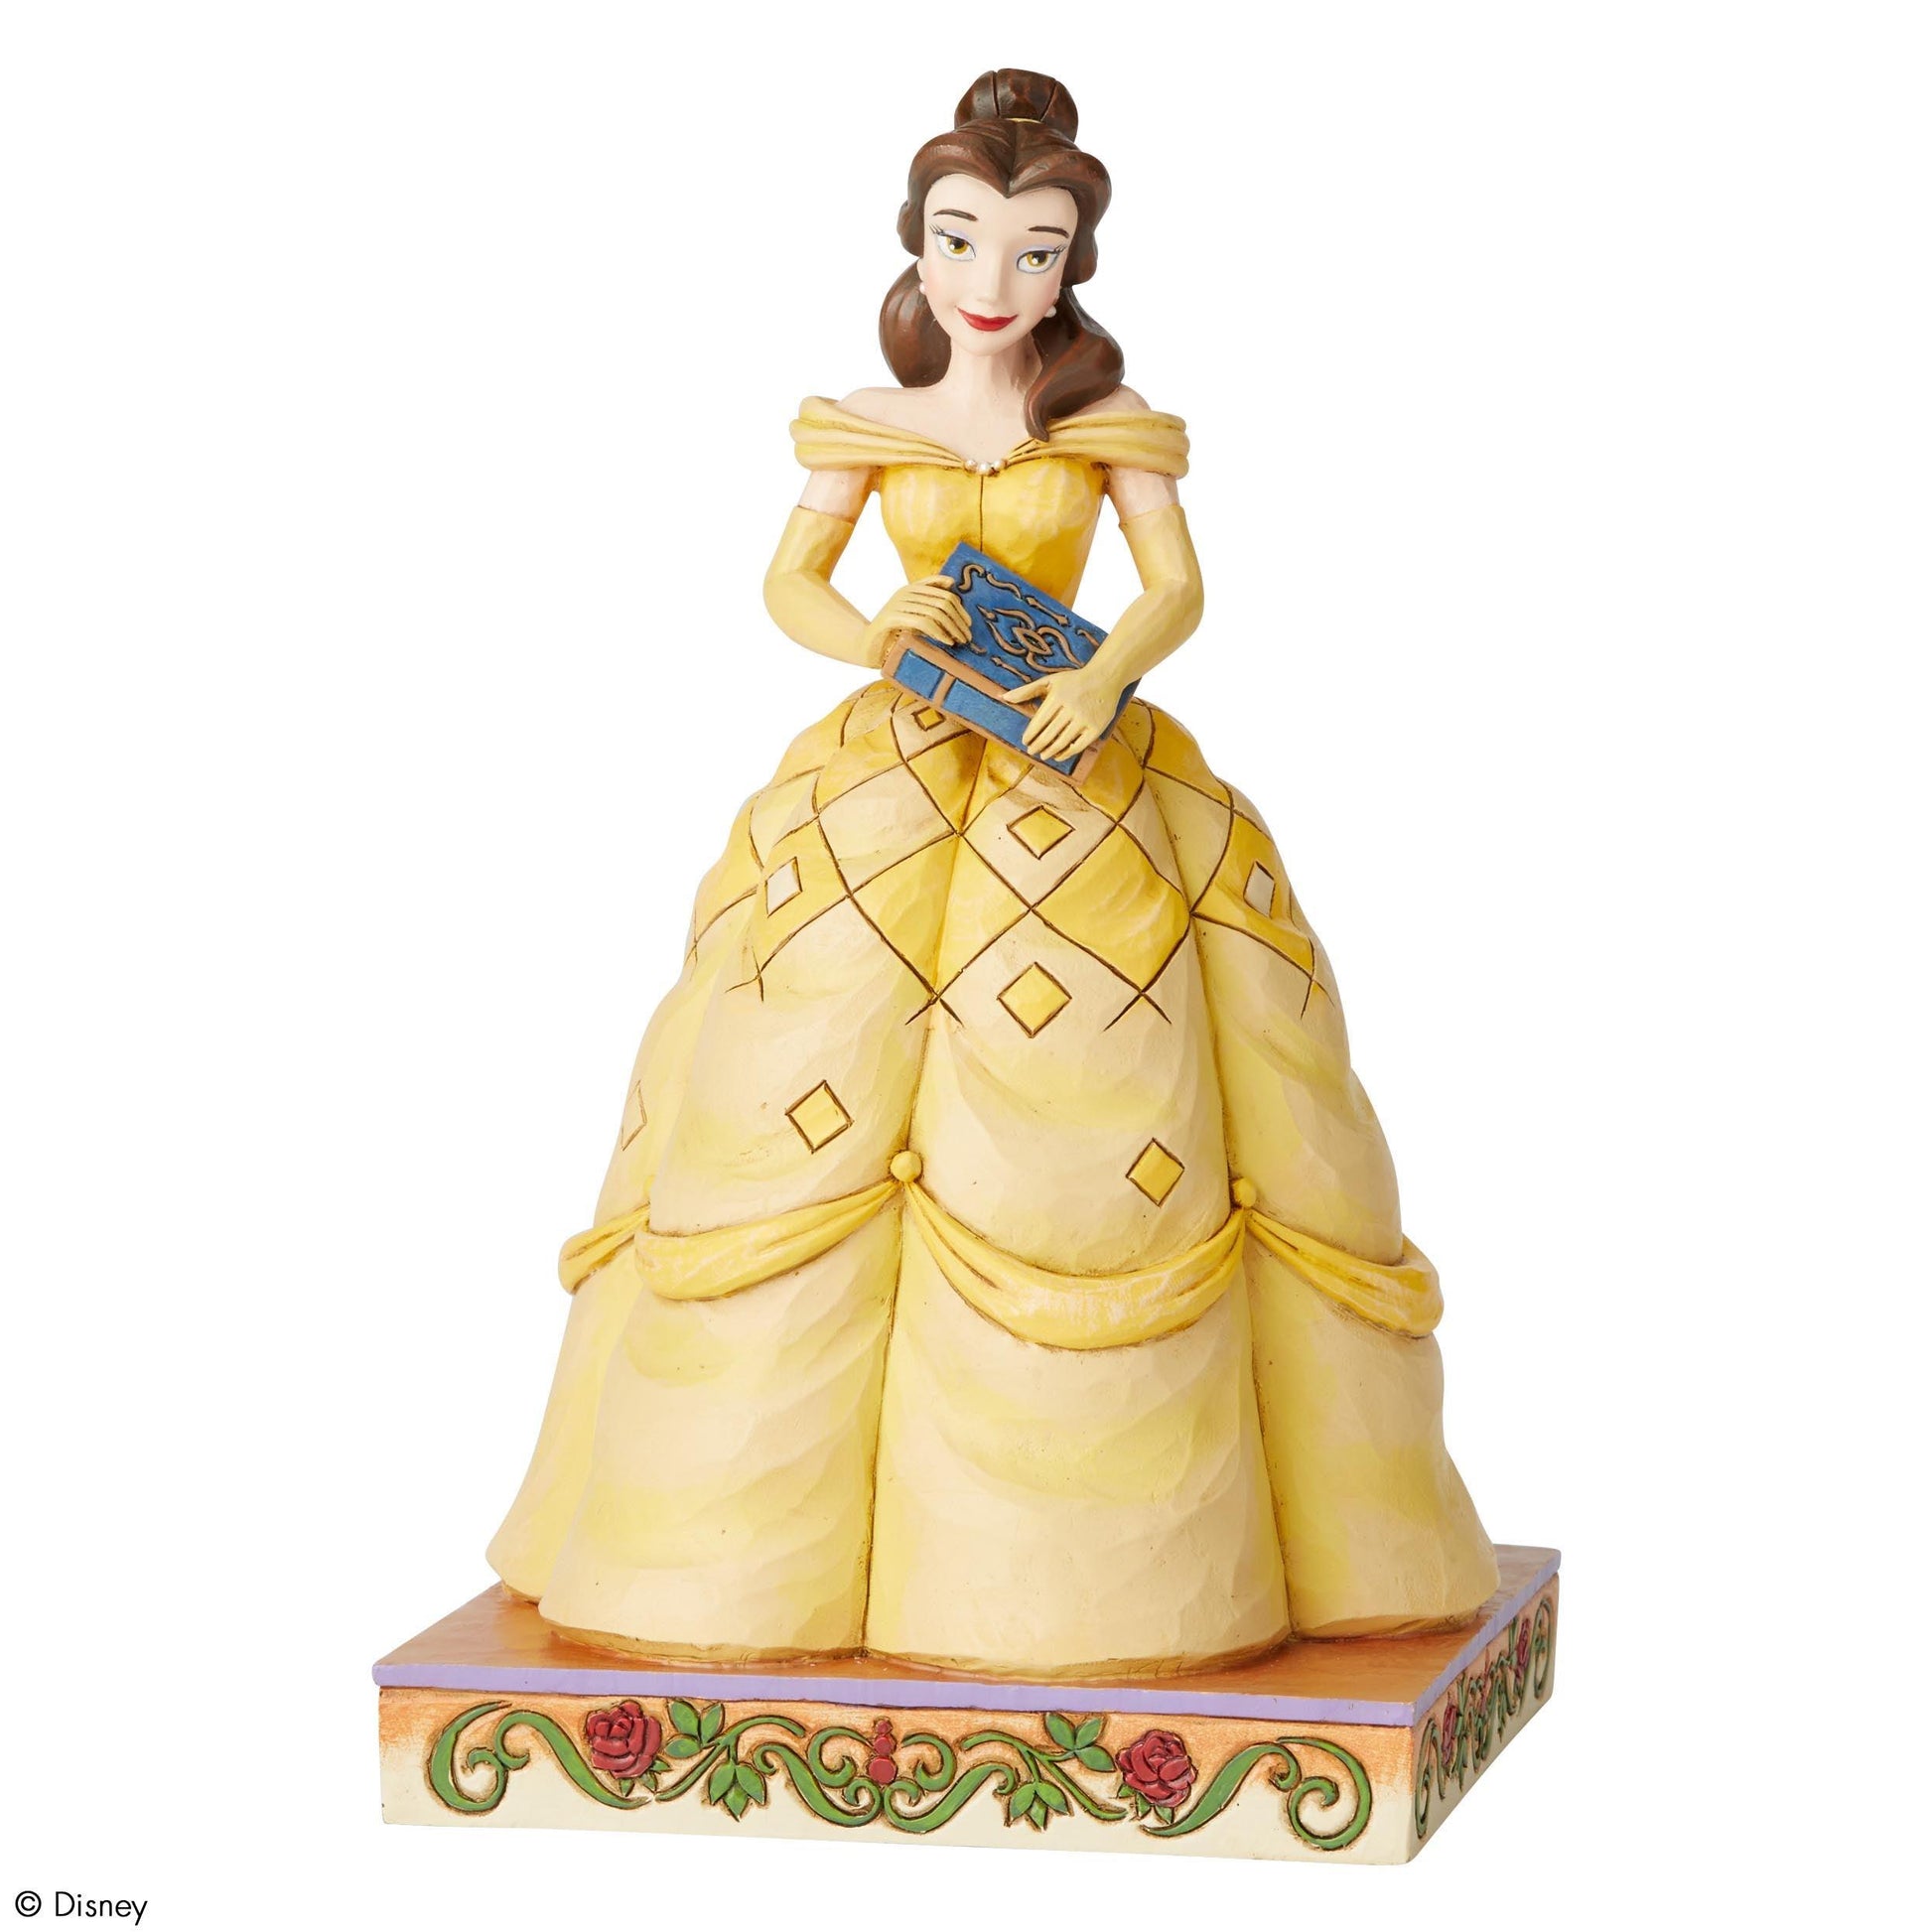 Book-Smart Beauty (Belle Princess Passion Figurine) (Disney Traditions by Jim Shore) - Gallery Gifts Online 